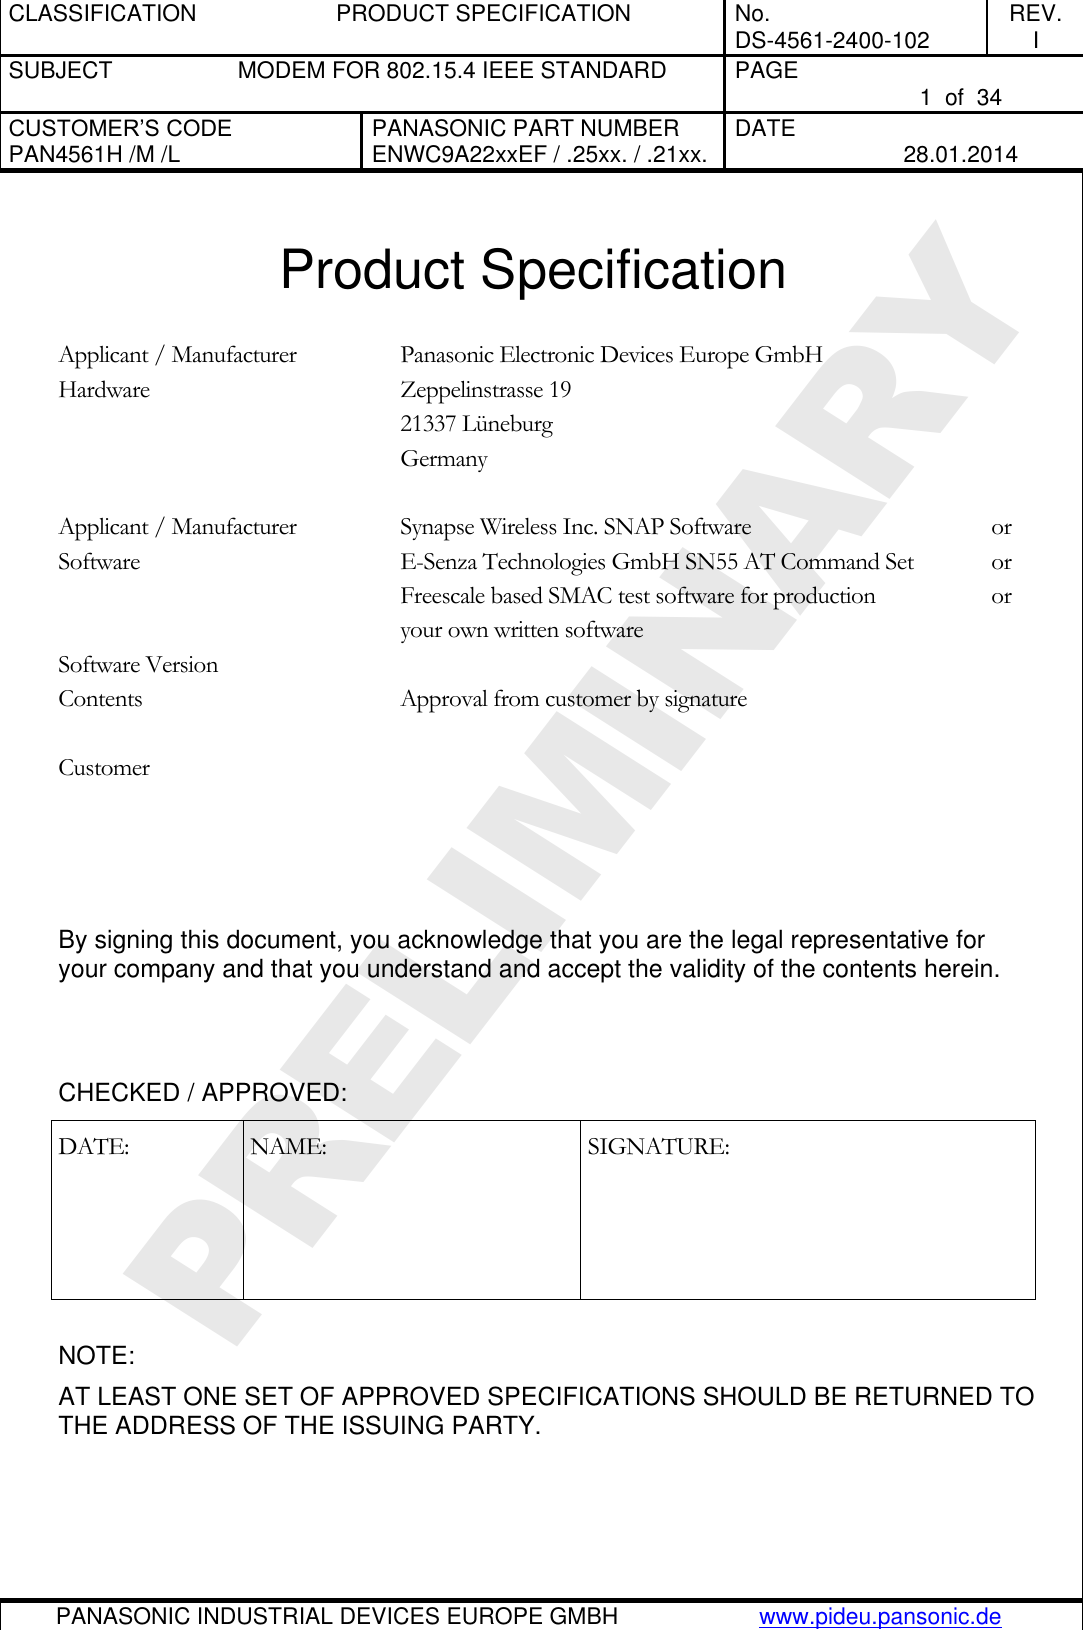 CLASSIFICATION  PRODUCT SPECIFICATION  No. DS-4561-2400-102 REV. I SUBJECT  MODEM FOR 802.15.4 IEEE STANDARD  PAGE   1  of  34 CUSTOMER’S CODE PAN4561H /M /L PANASONIC PART NUMBER ENWC9A22xxEF / .25xx. / .21xx. DATE   28.01.2014   PANASONIC INDUSTRIAL DEVICES EUROPE GMBH www.pideu.pansonic.de  PRELIMINARY  Product Specification  Applicant / Manufacturer Hardware Panasonic Electronic Devices Europe GmbH Zeppelinstrasse 19 21337 Lüneburg Germany   Applicant / Manufacturer Software Synapse Wireless Inc. SNAP Software        or E-Senza Technologies GmbH SN55 AT Command Set   or Freescale based SMAC test software for production    or your own written software Software Version  Contents Approval from customer by signature   Customer       By signing this document, you acknowledge that you are the legal representative for your company and that you understand and accept the validity of the contents herein.   CHECKED / APPROVED: DATE: NAME: SIGNATURE:  NOTE: AT LEAST ONE SET OF APPROVED SPECIFICATIONS SHOULD BE RETURNED TO THE ADDRESS OF THE ISSUING PARTY. 